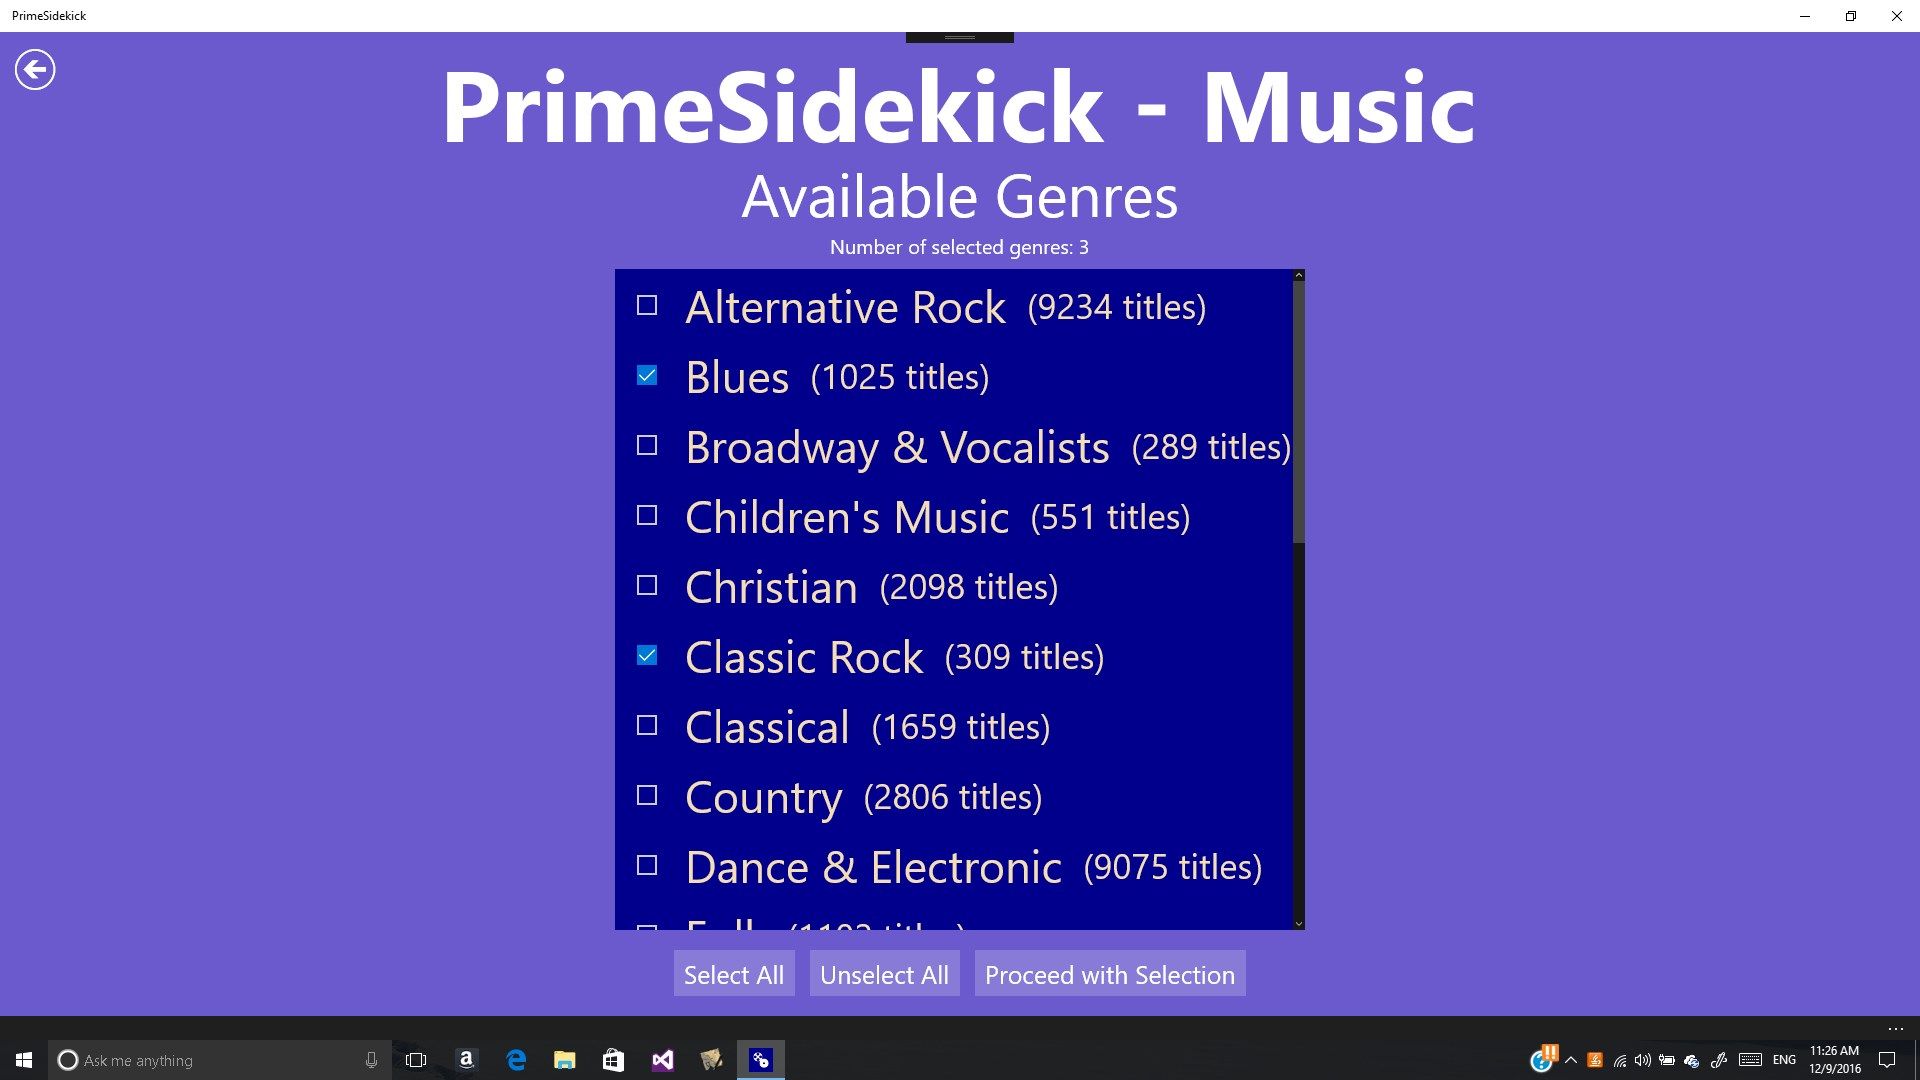 This screen allows the users to select the Amazon Prime Music genres they are interested in.